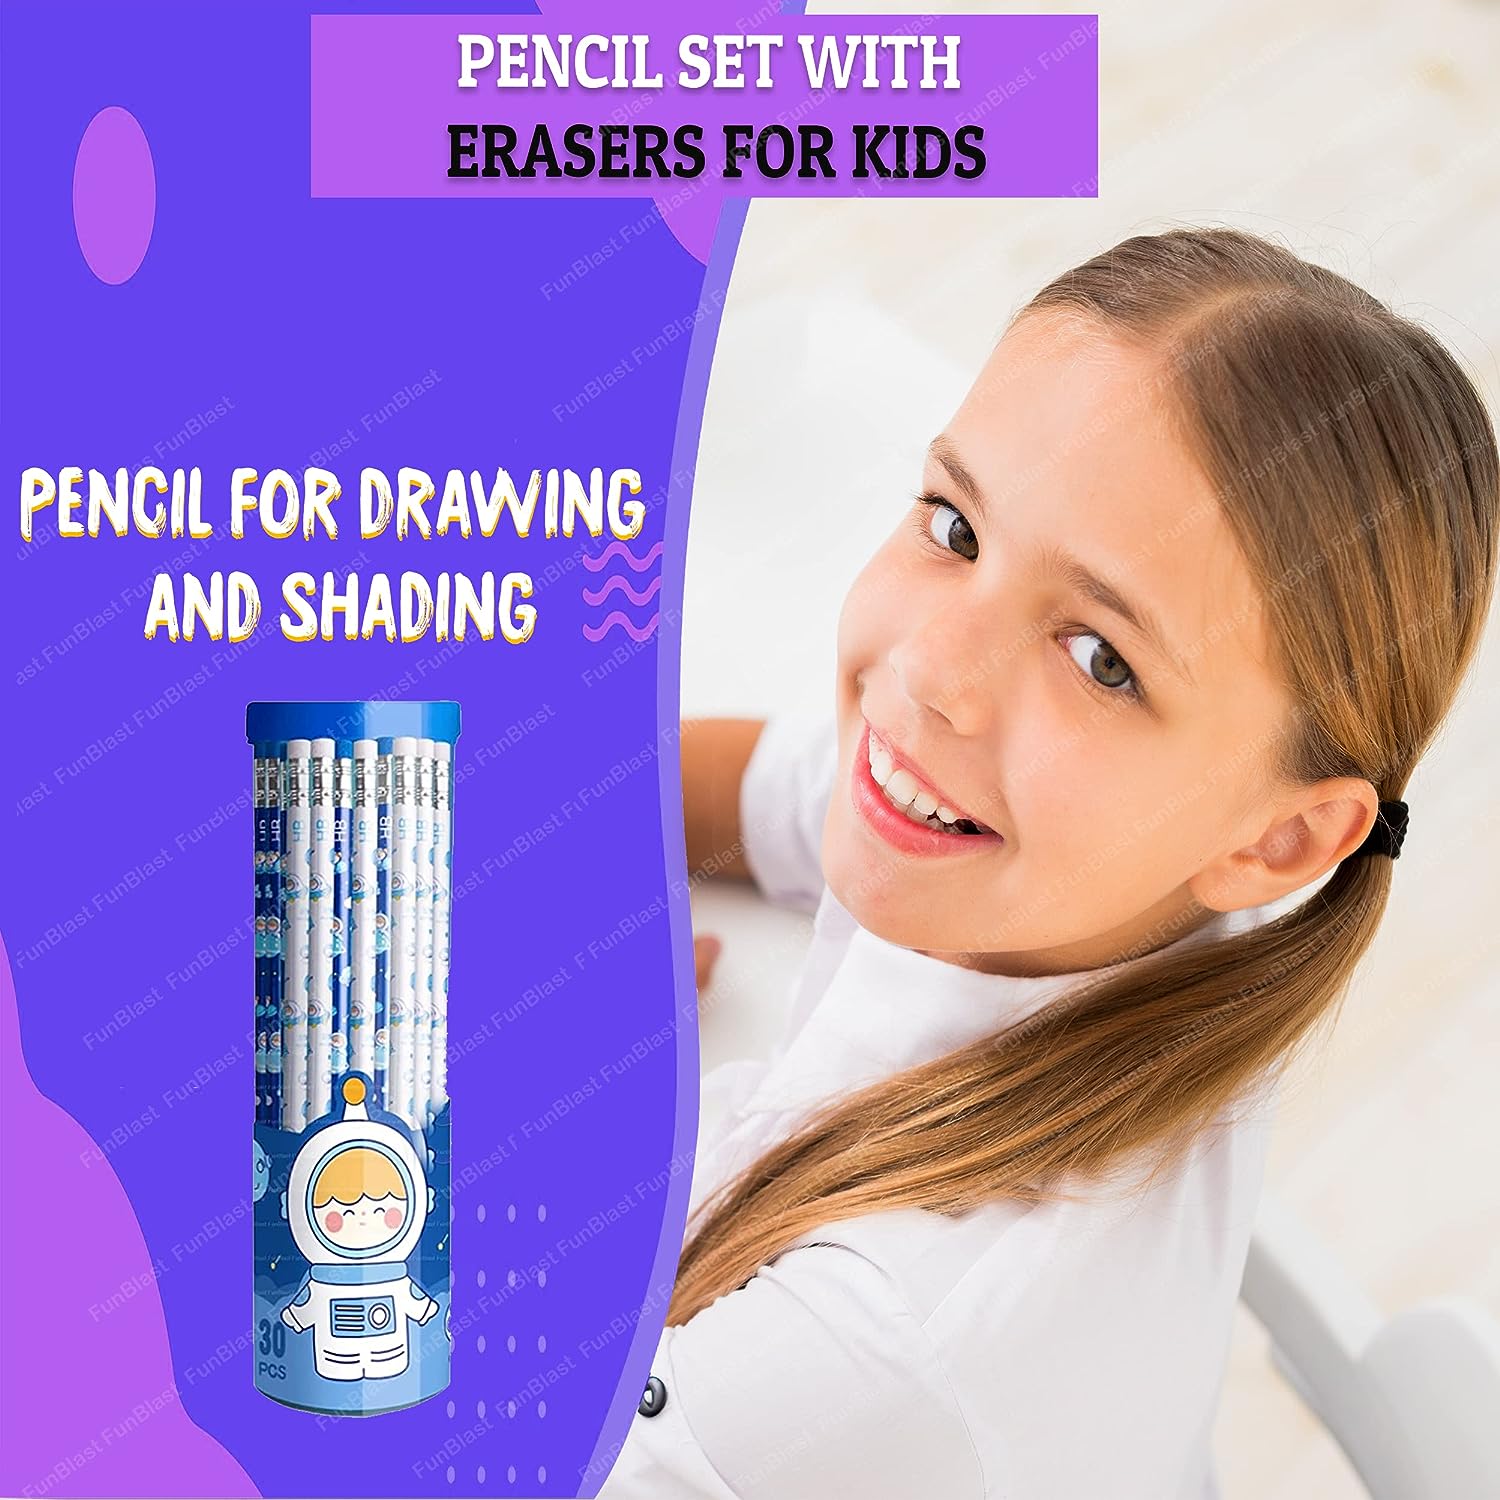 Cute Pencil for Kids, Stylish Pencils Stationary Kit – Space Pencil Set with Erasers for Kids, Pencil for Drawing and Shading, Birthday Return Gift, Stationary Set – 30 Pcs Box Set